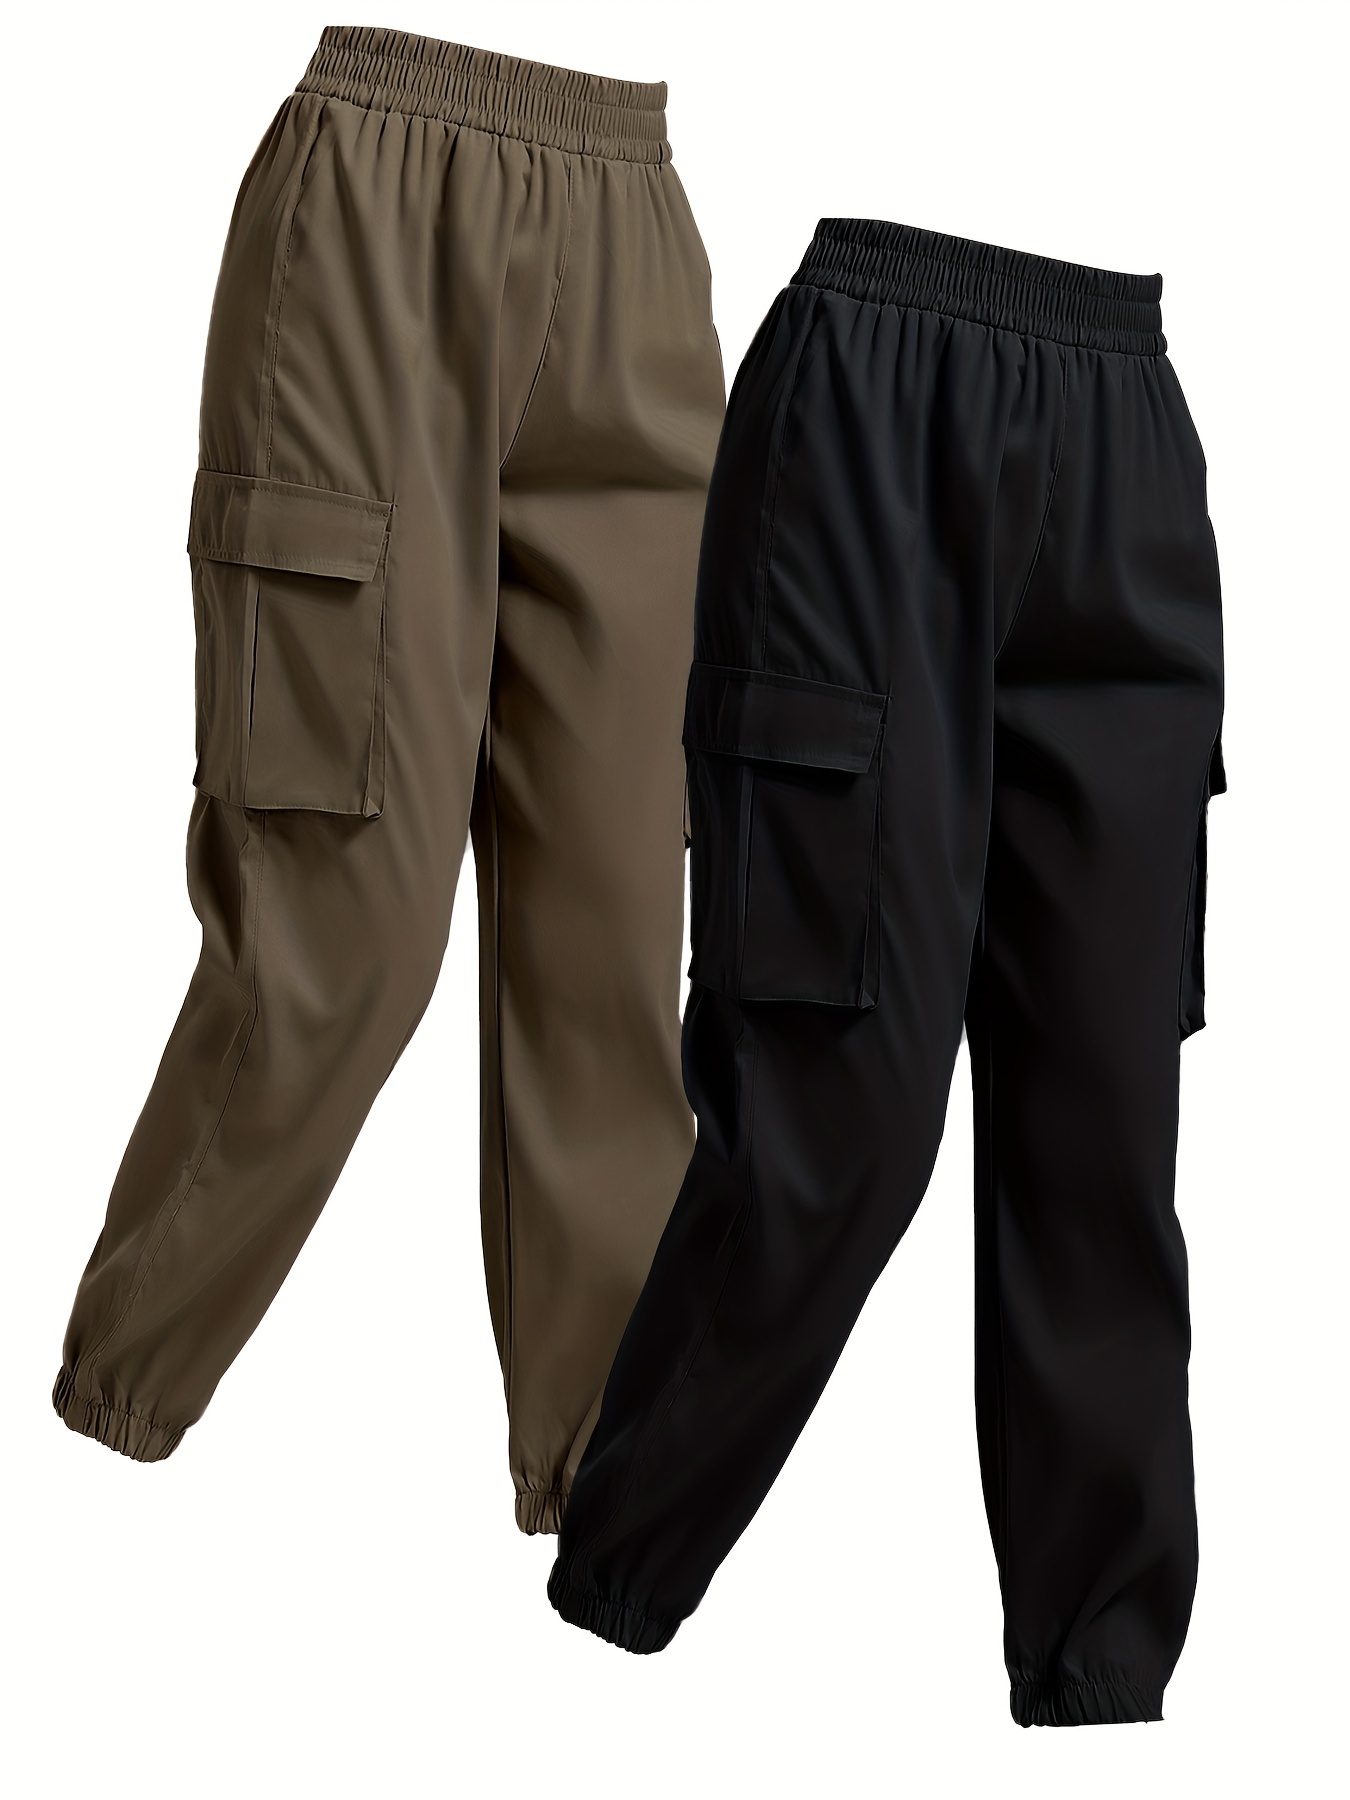 solid jogger cargo pants 2 pack casual flap pocket elastic waist pants womens clothing details 0